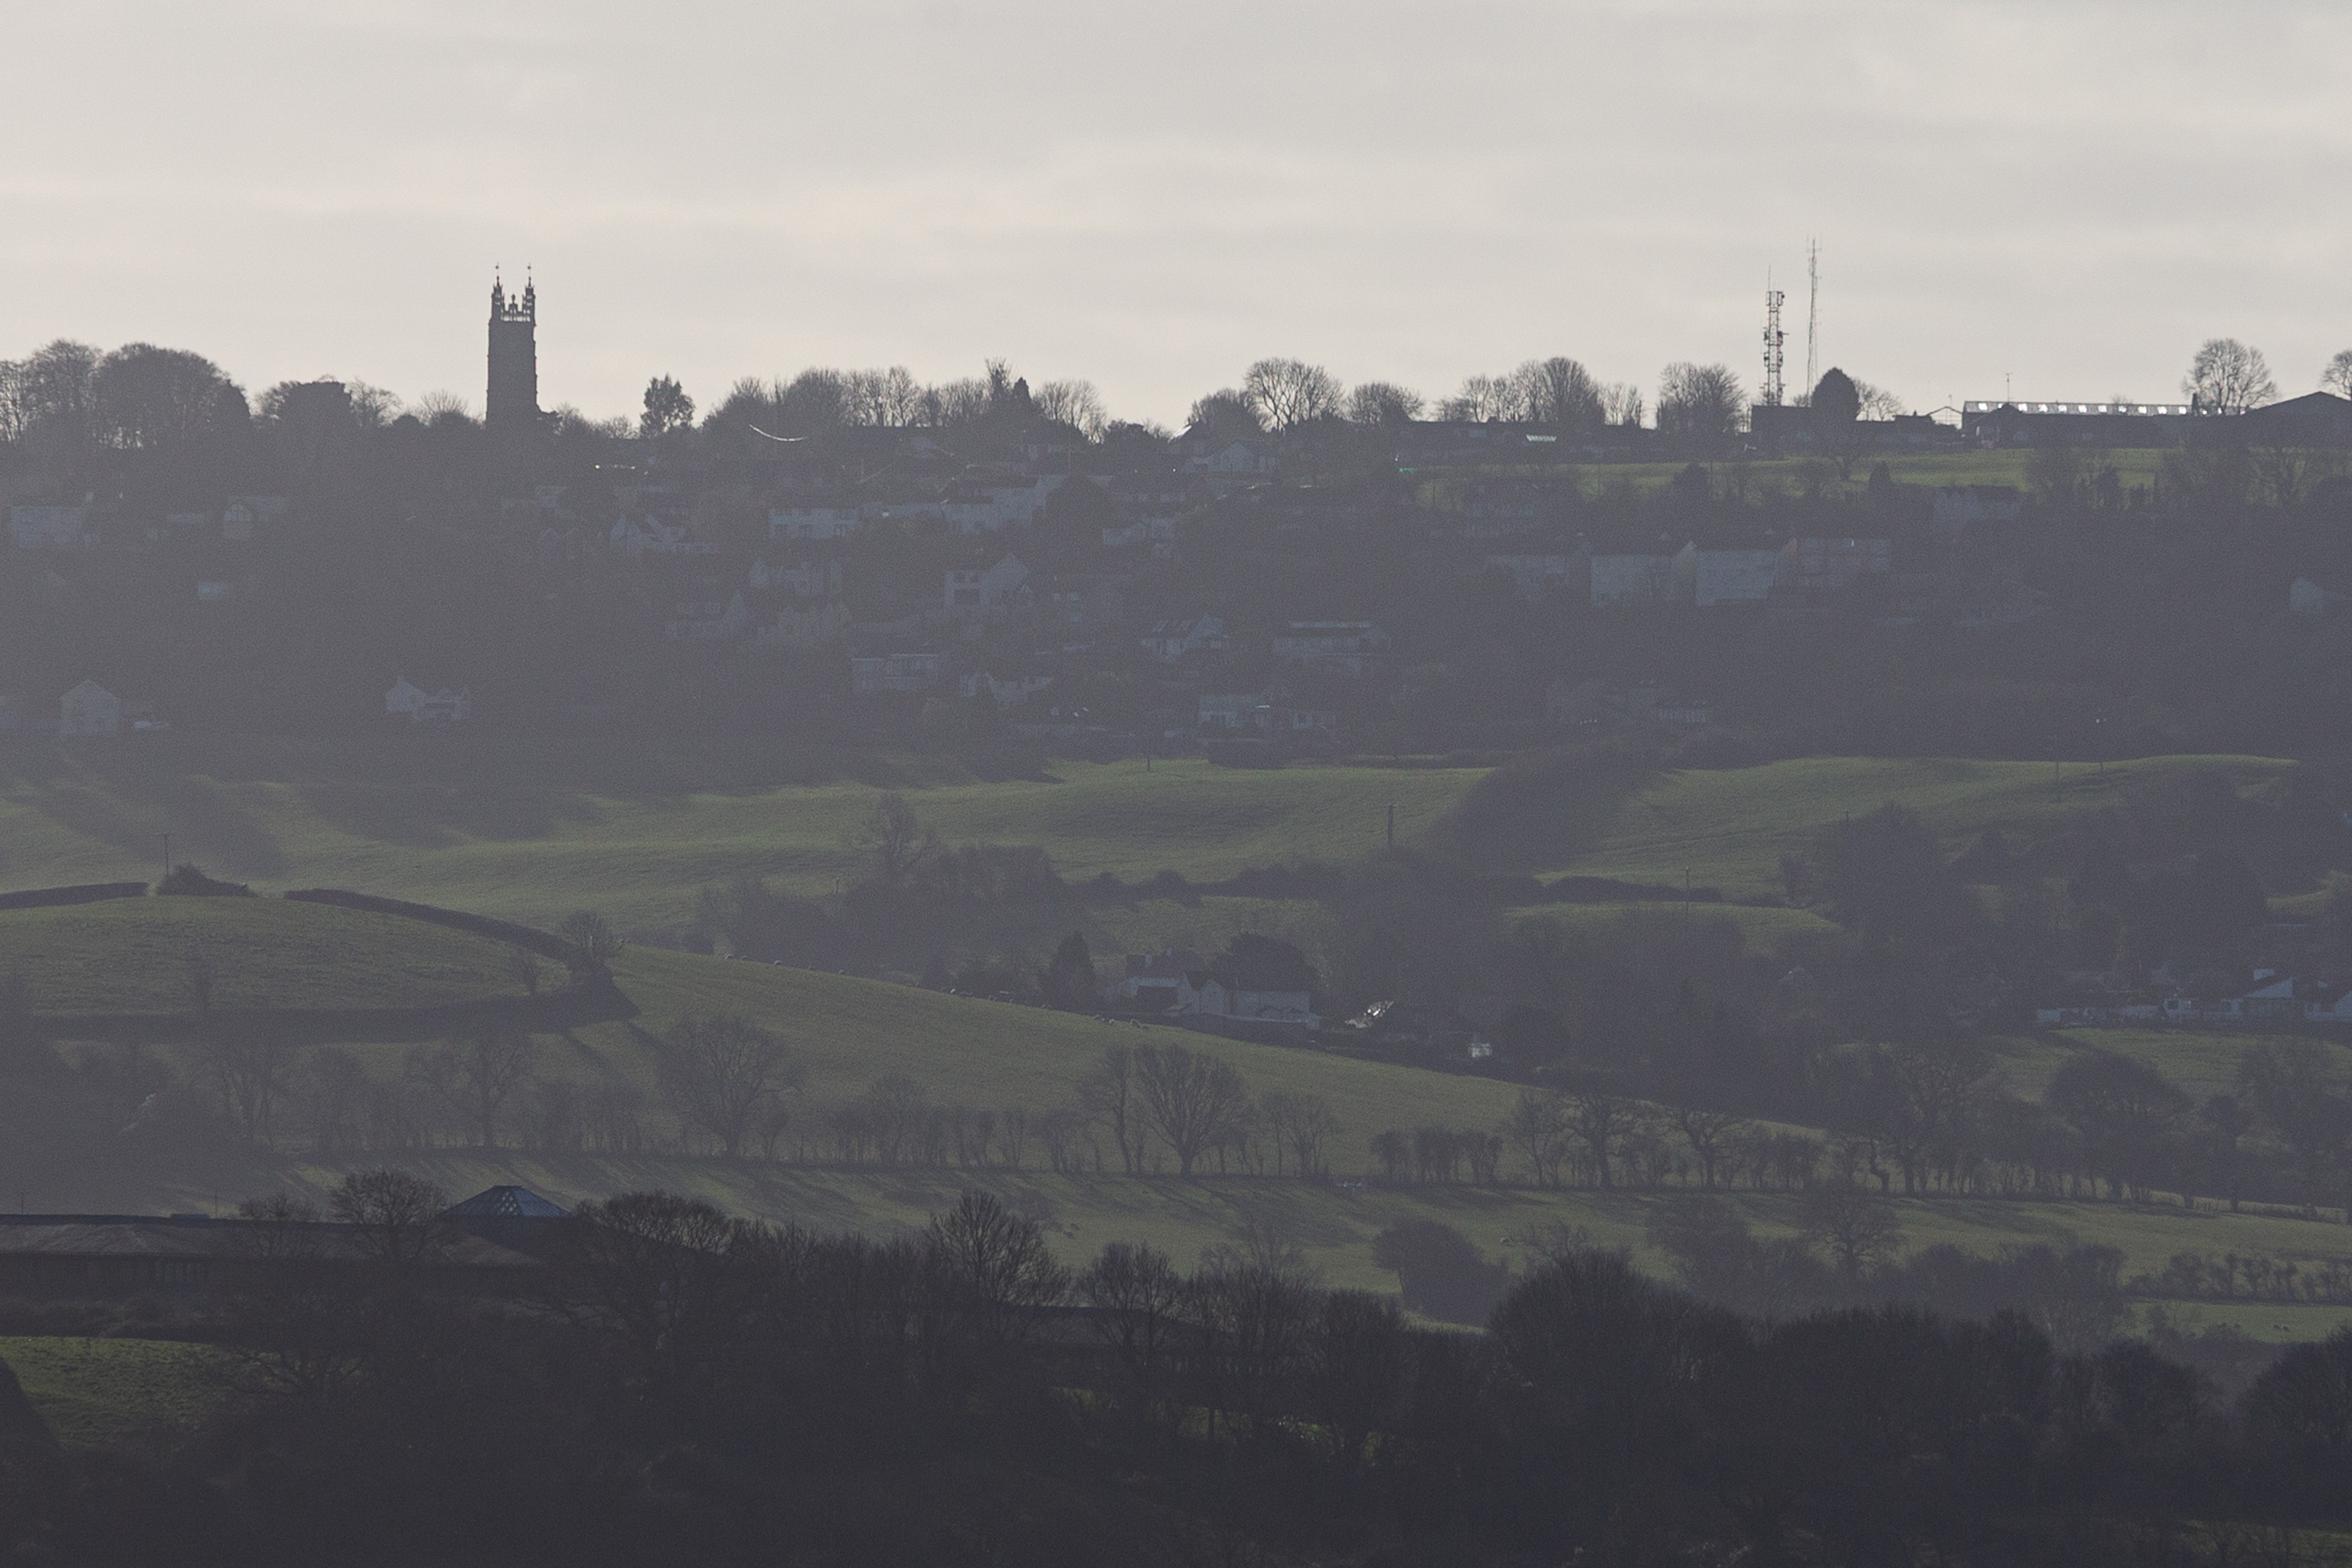 Distant Dundry
